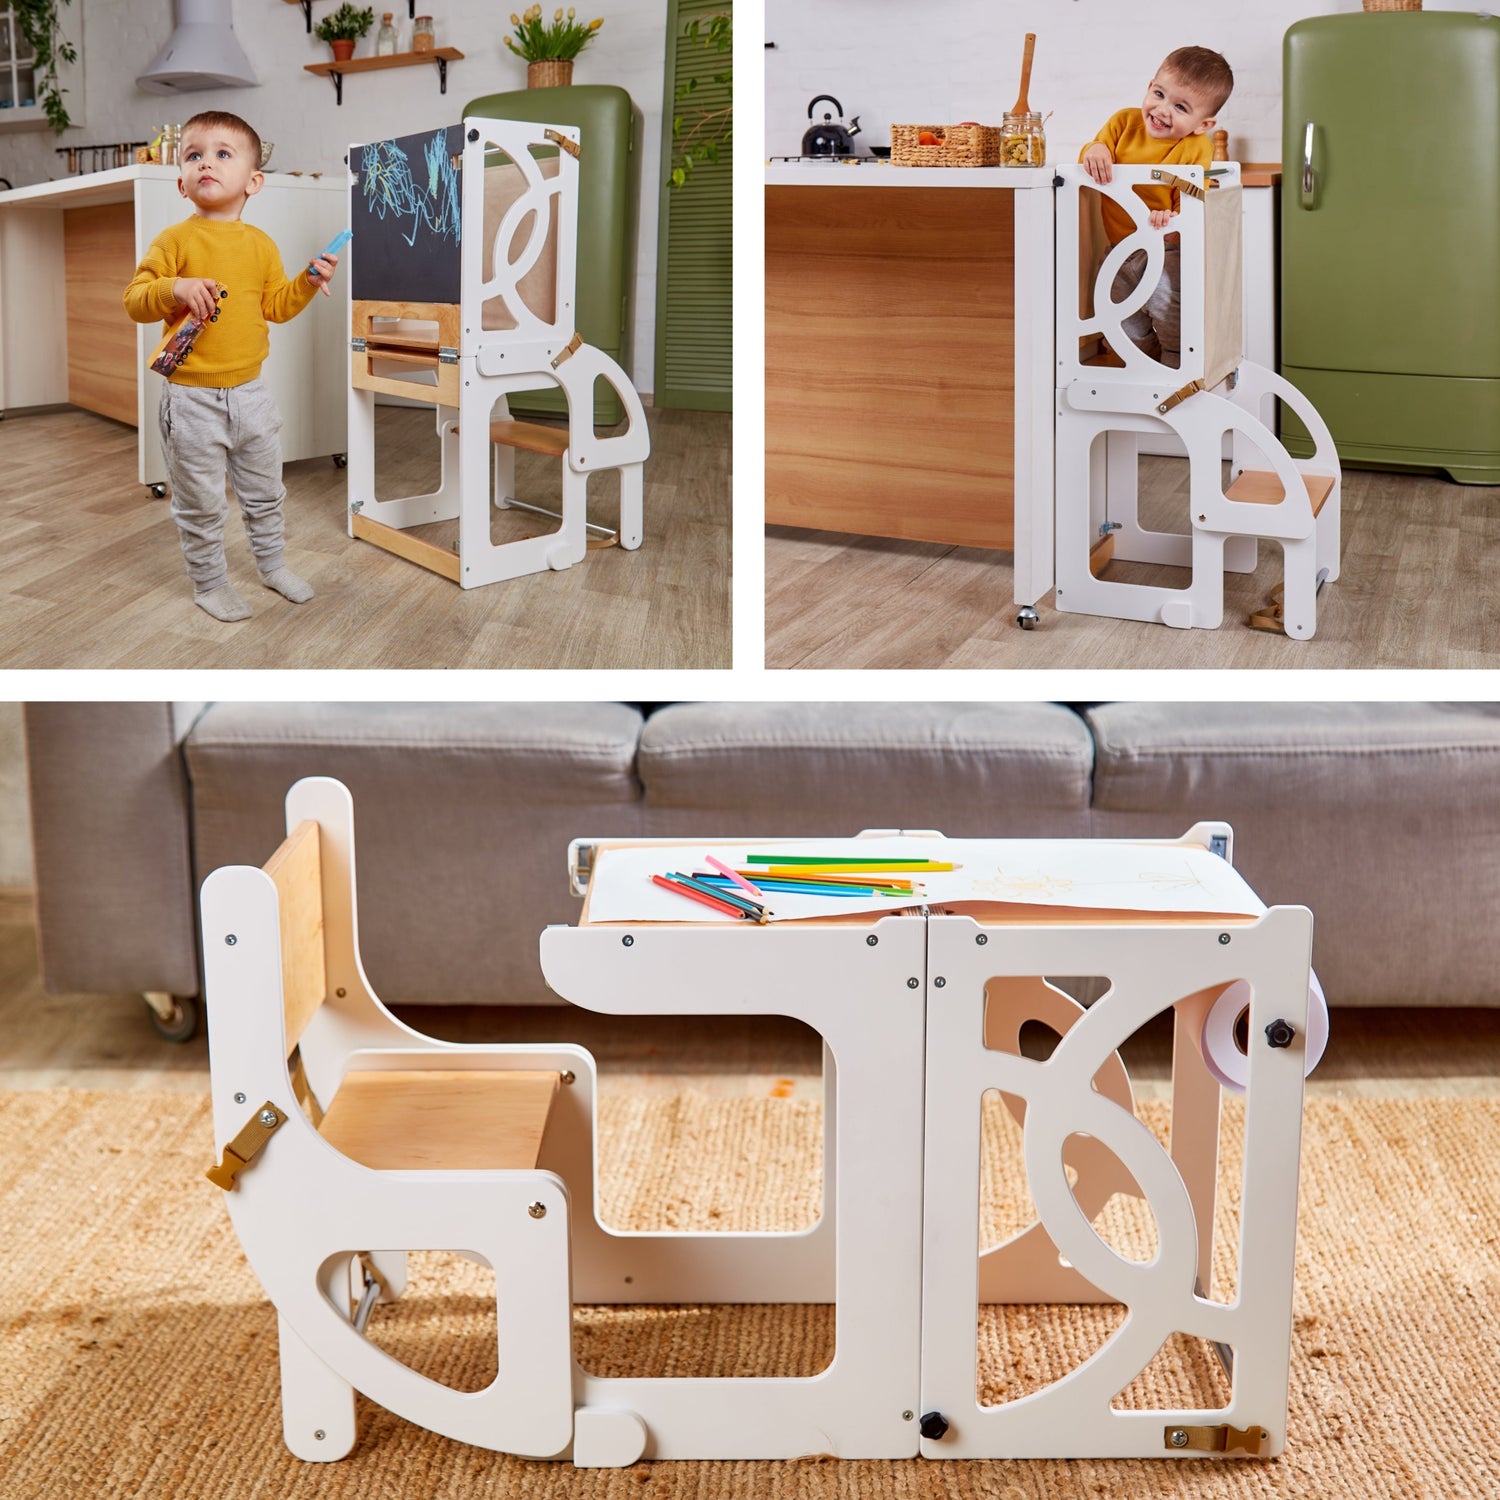 Convertible learning toddler tower with Seatback: Table, Chair, and Slide